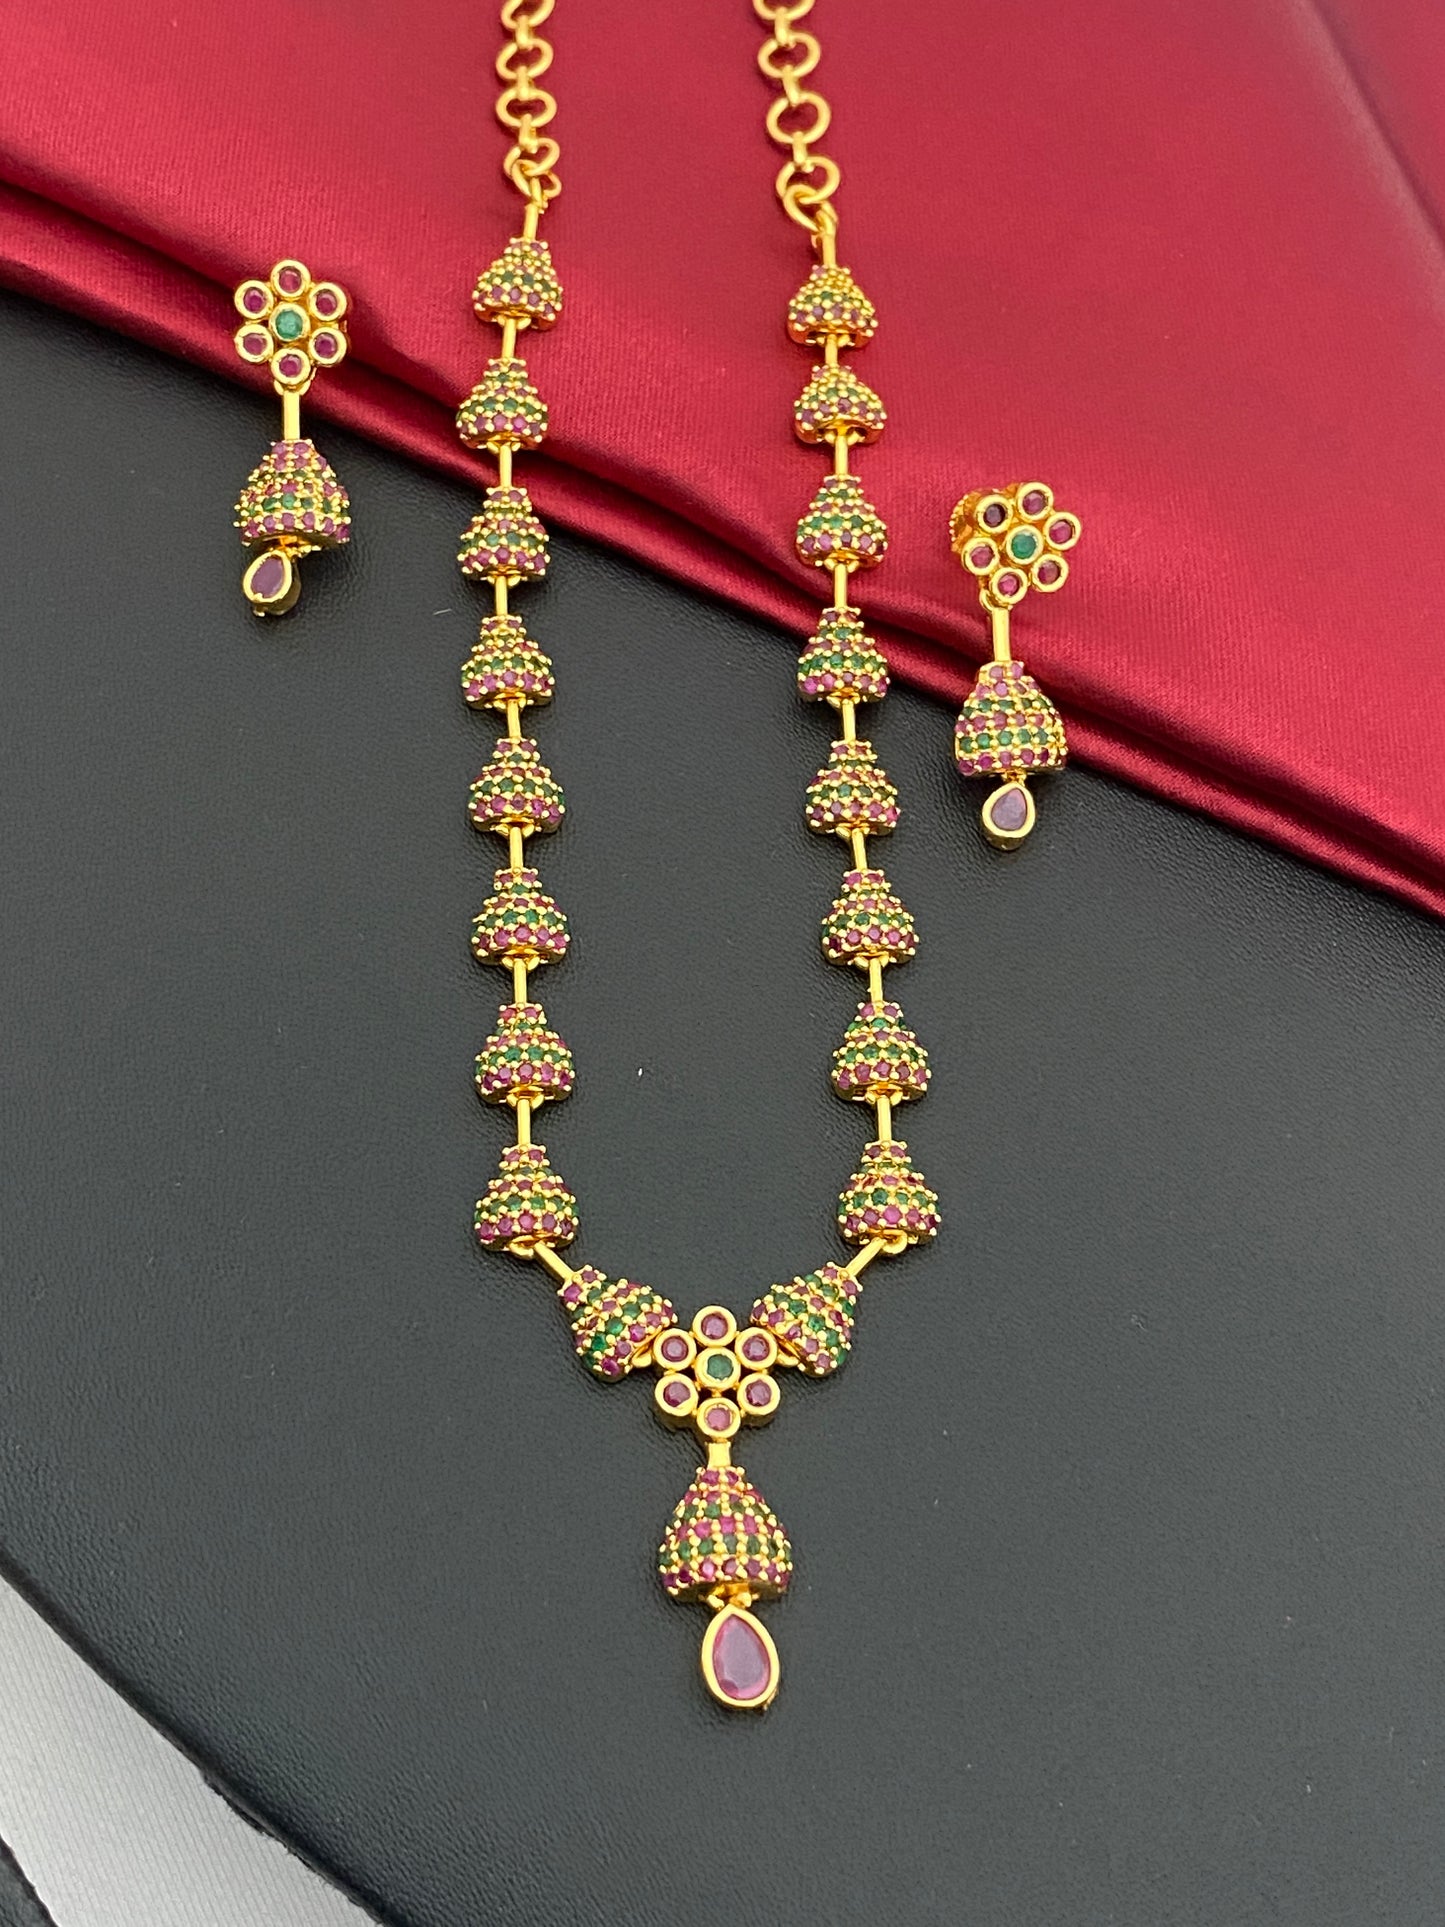 Necklace And Earrings With Ruby And Emerald Stones In Holbrook